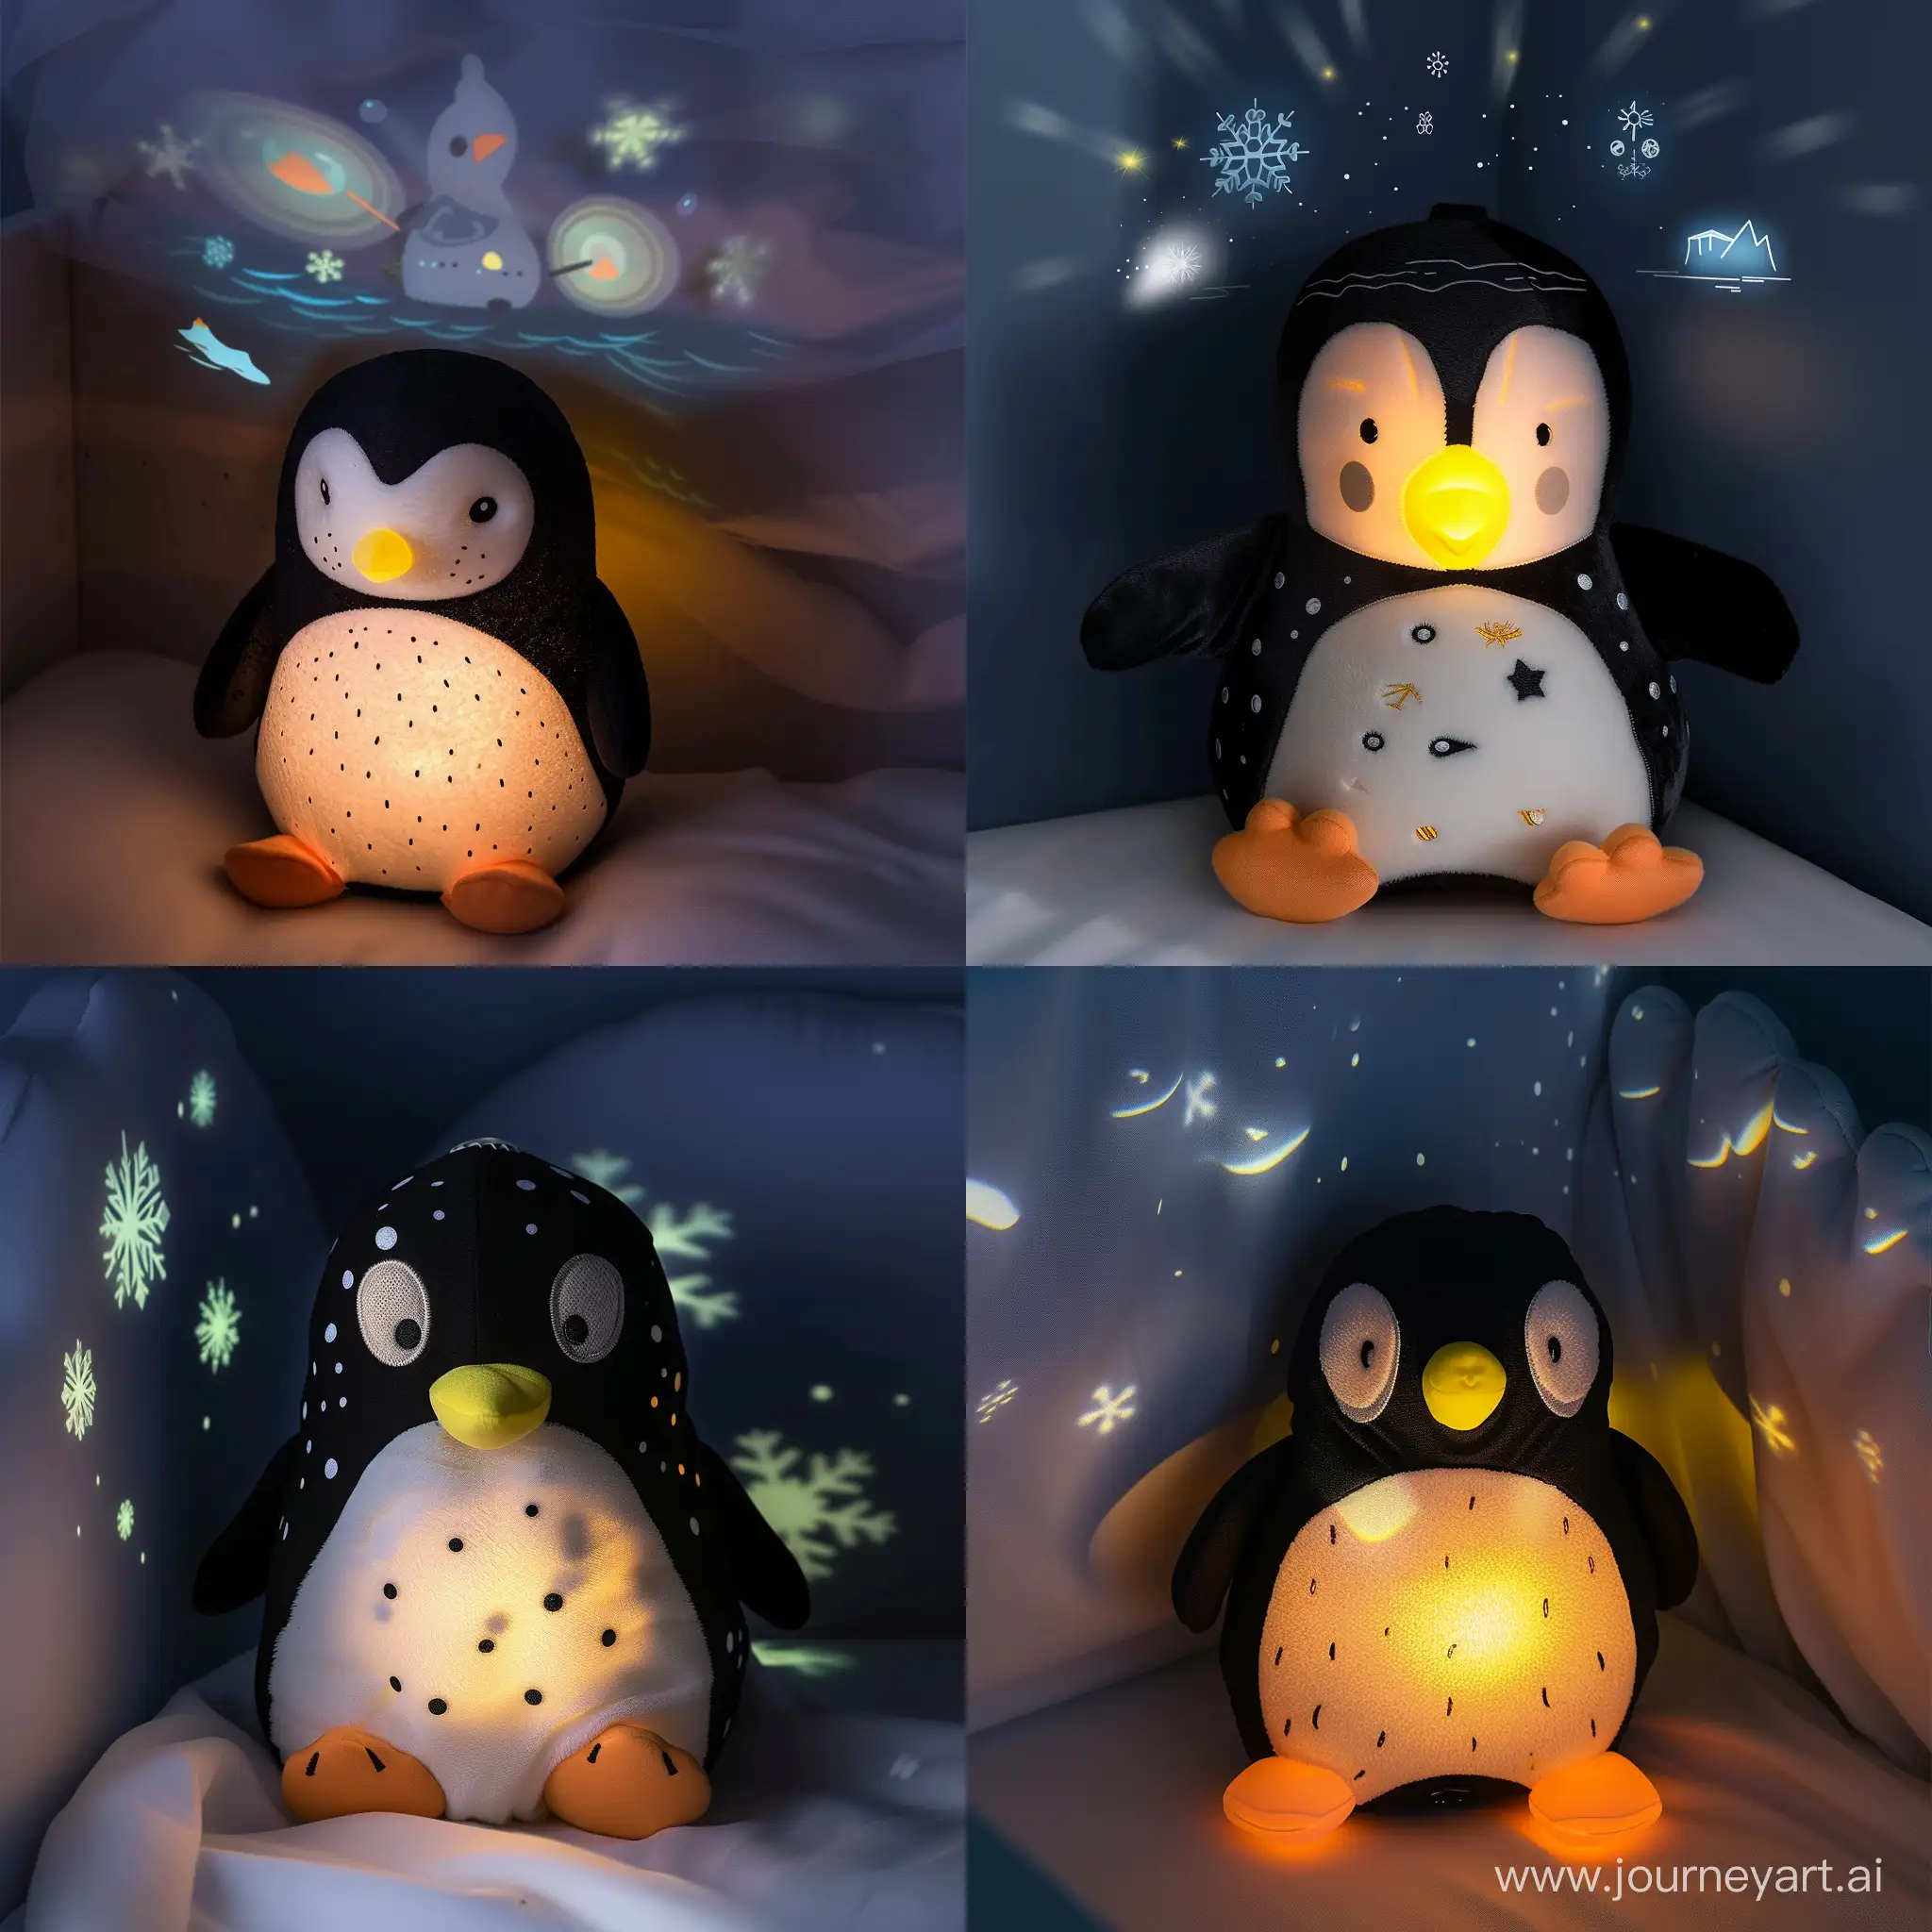 Soothing-Penguin-Baby-Lamp-with-Colorchanging-Light-and-Projection-Features